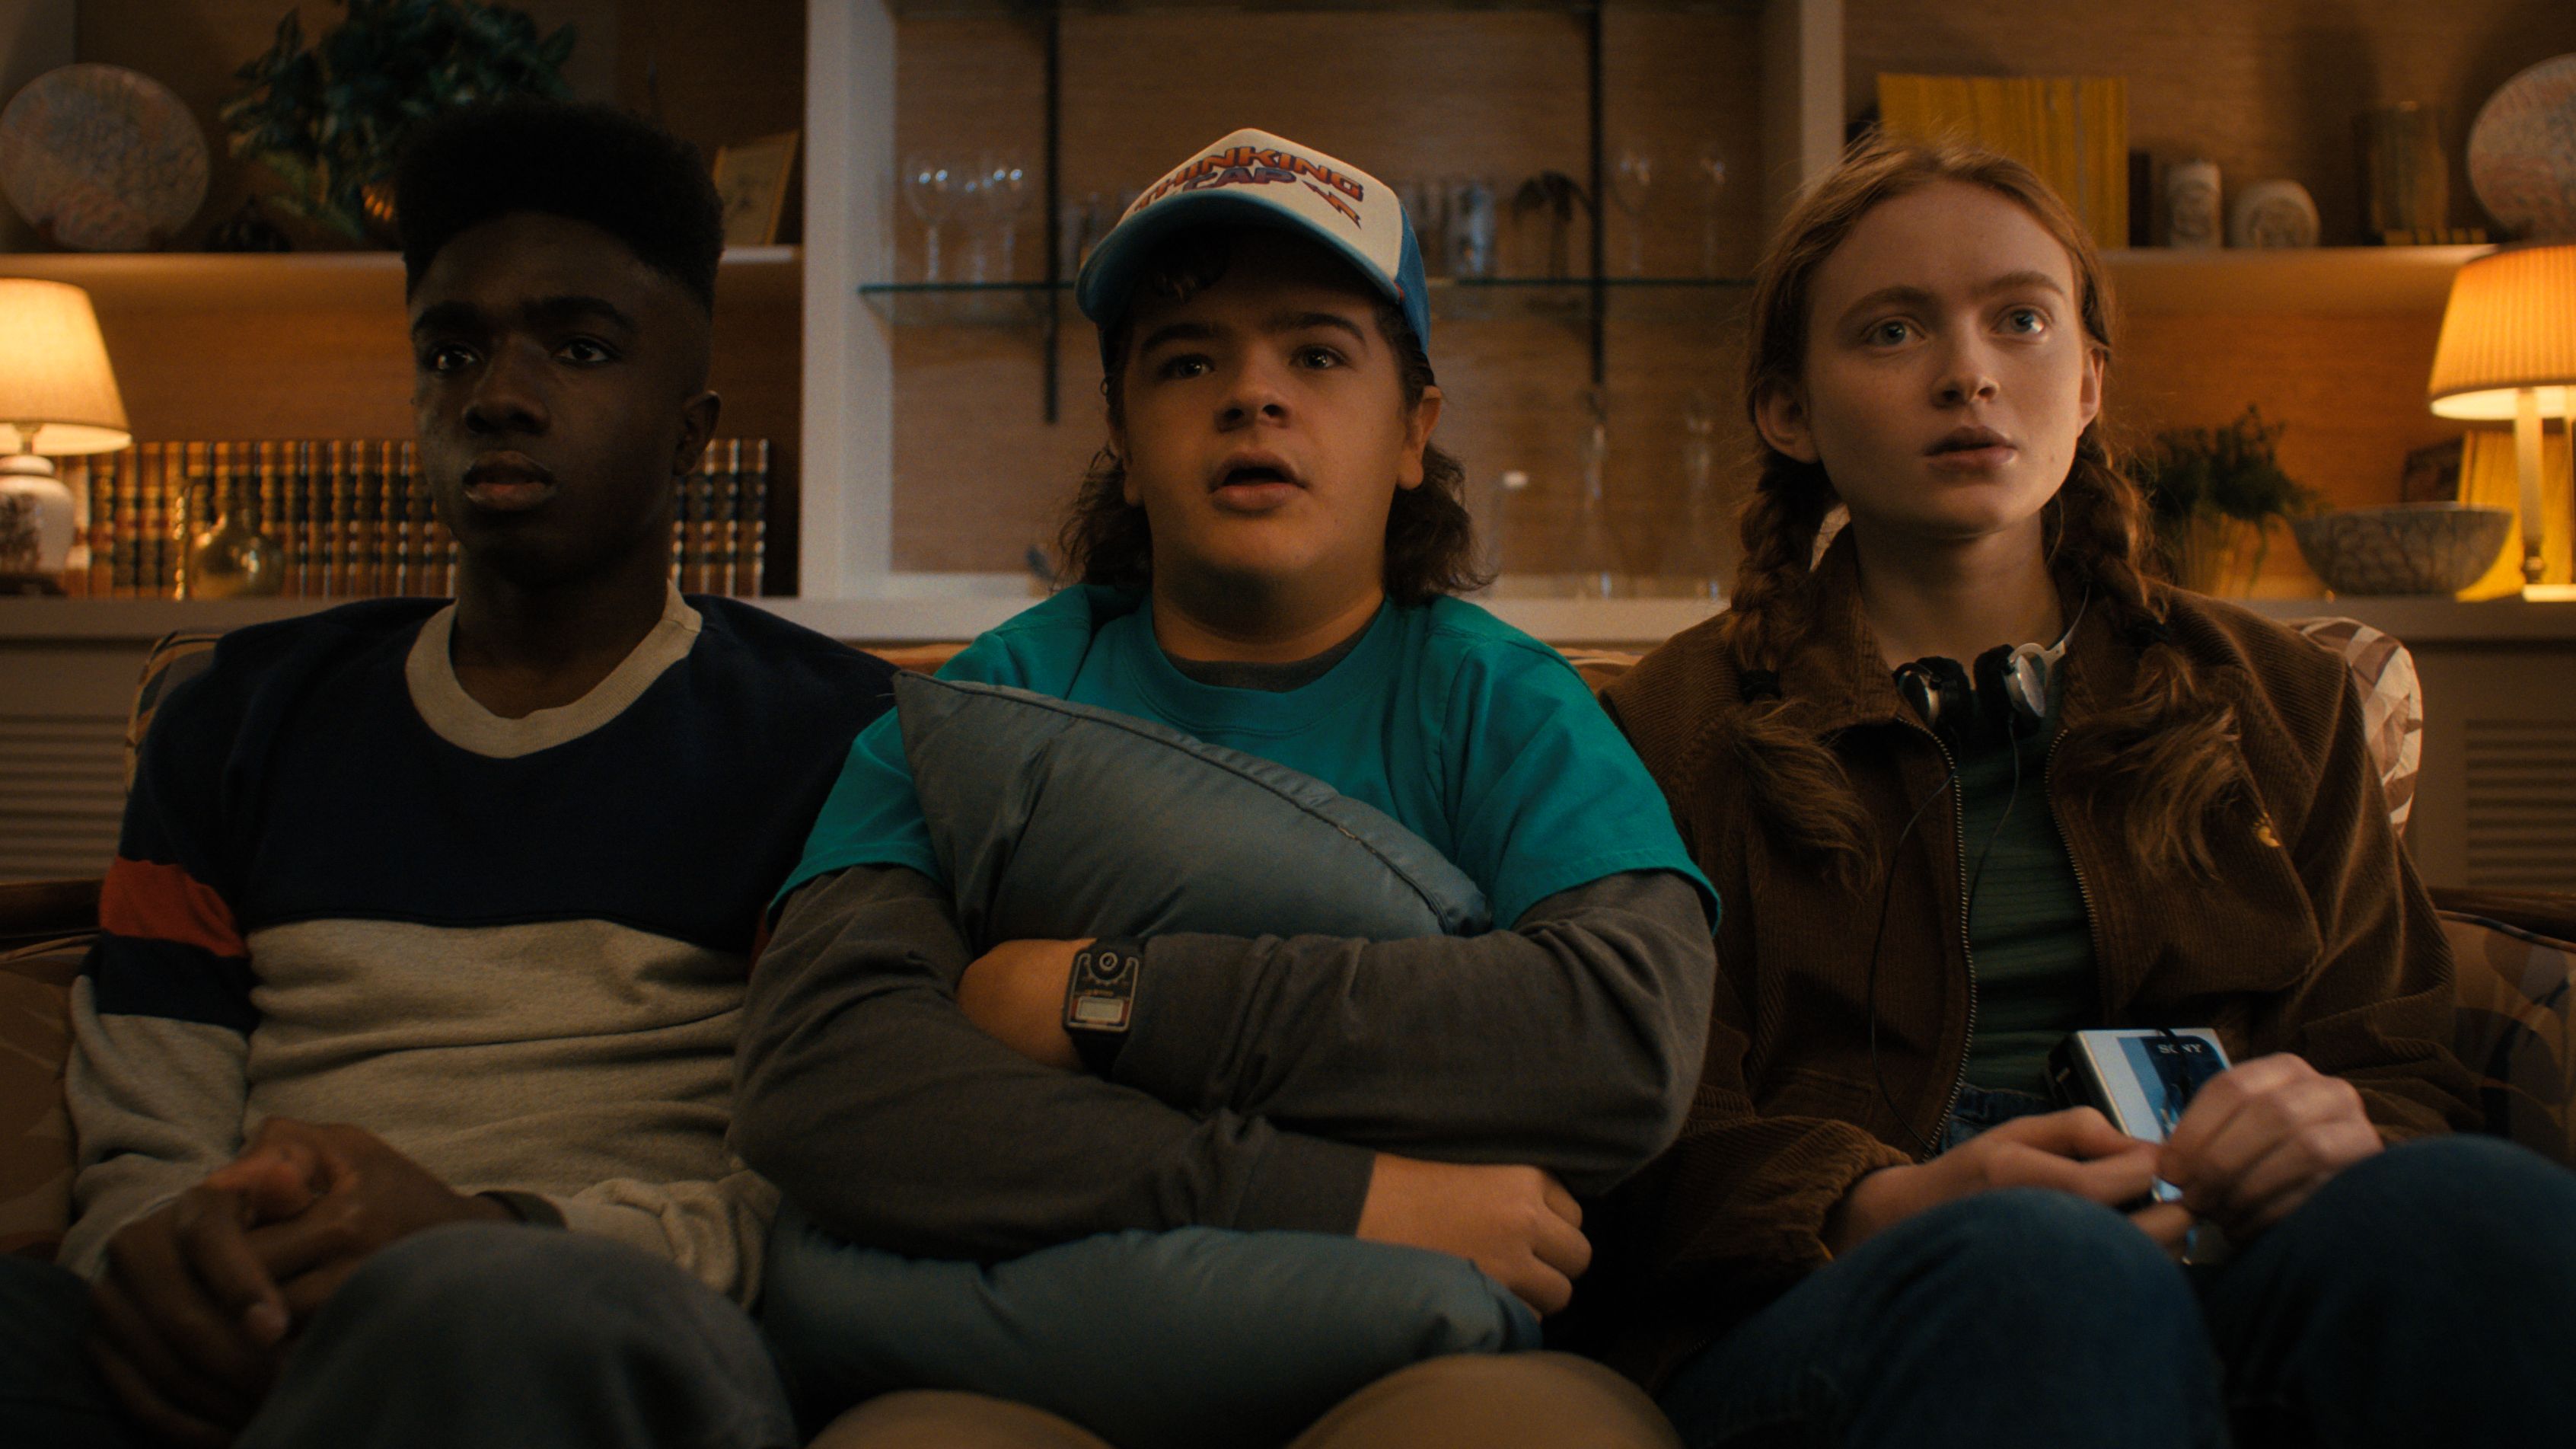 What's a song you want to hear in season 5? : r/StrangerThings